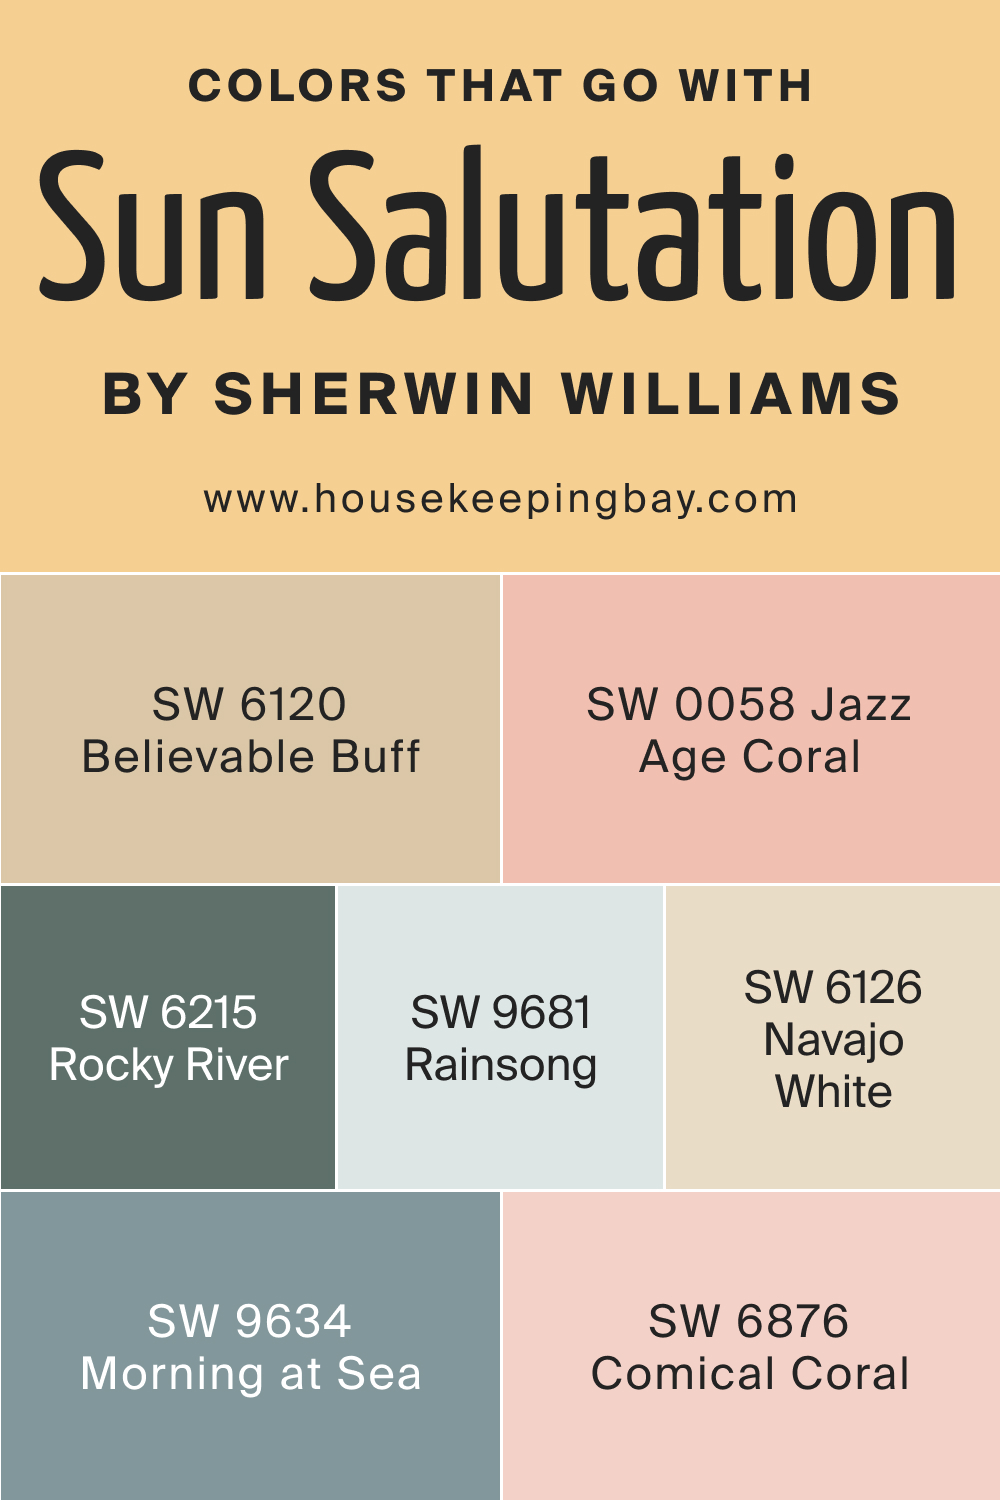 Colors that goes with Sun Salutation SW 9664 by Sherwin Williams